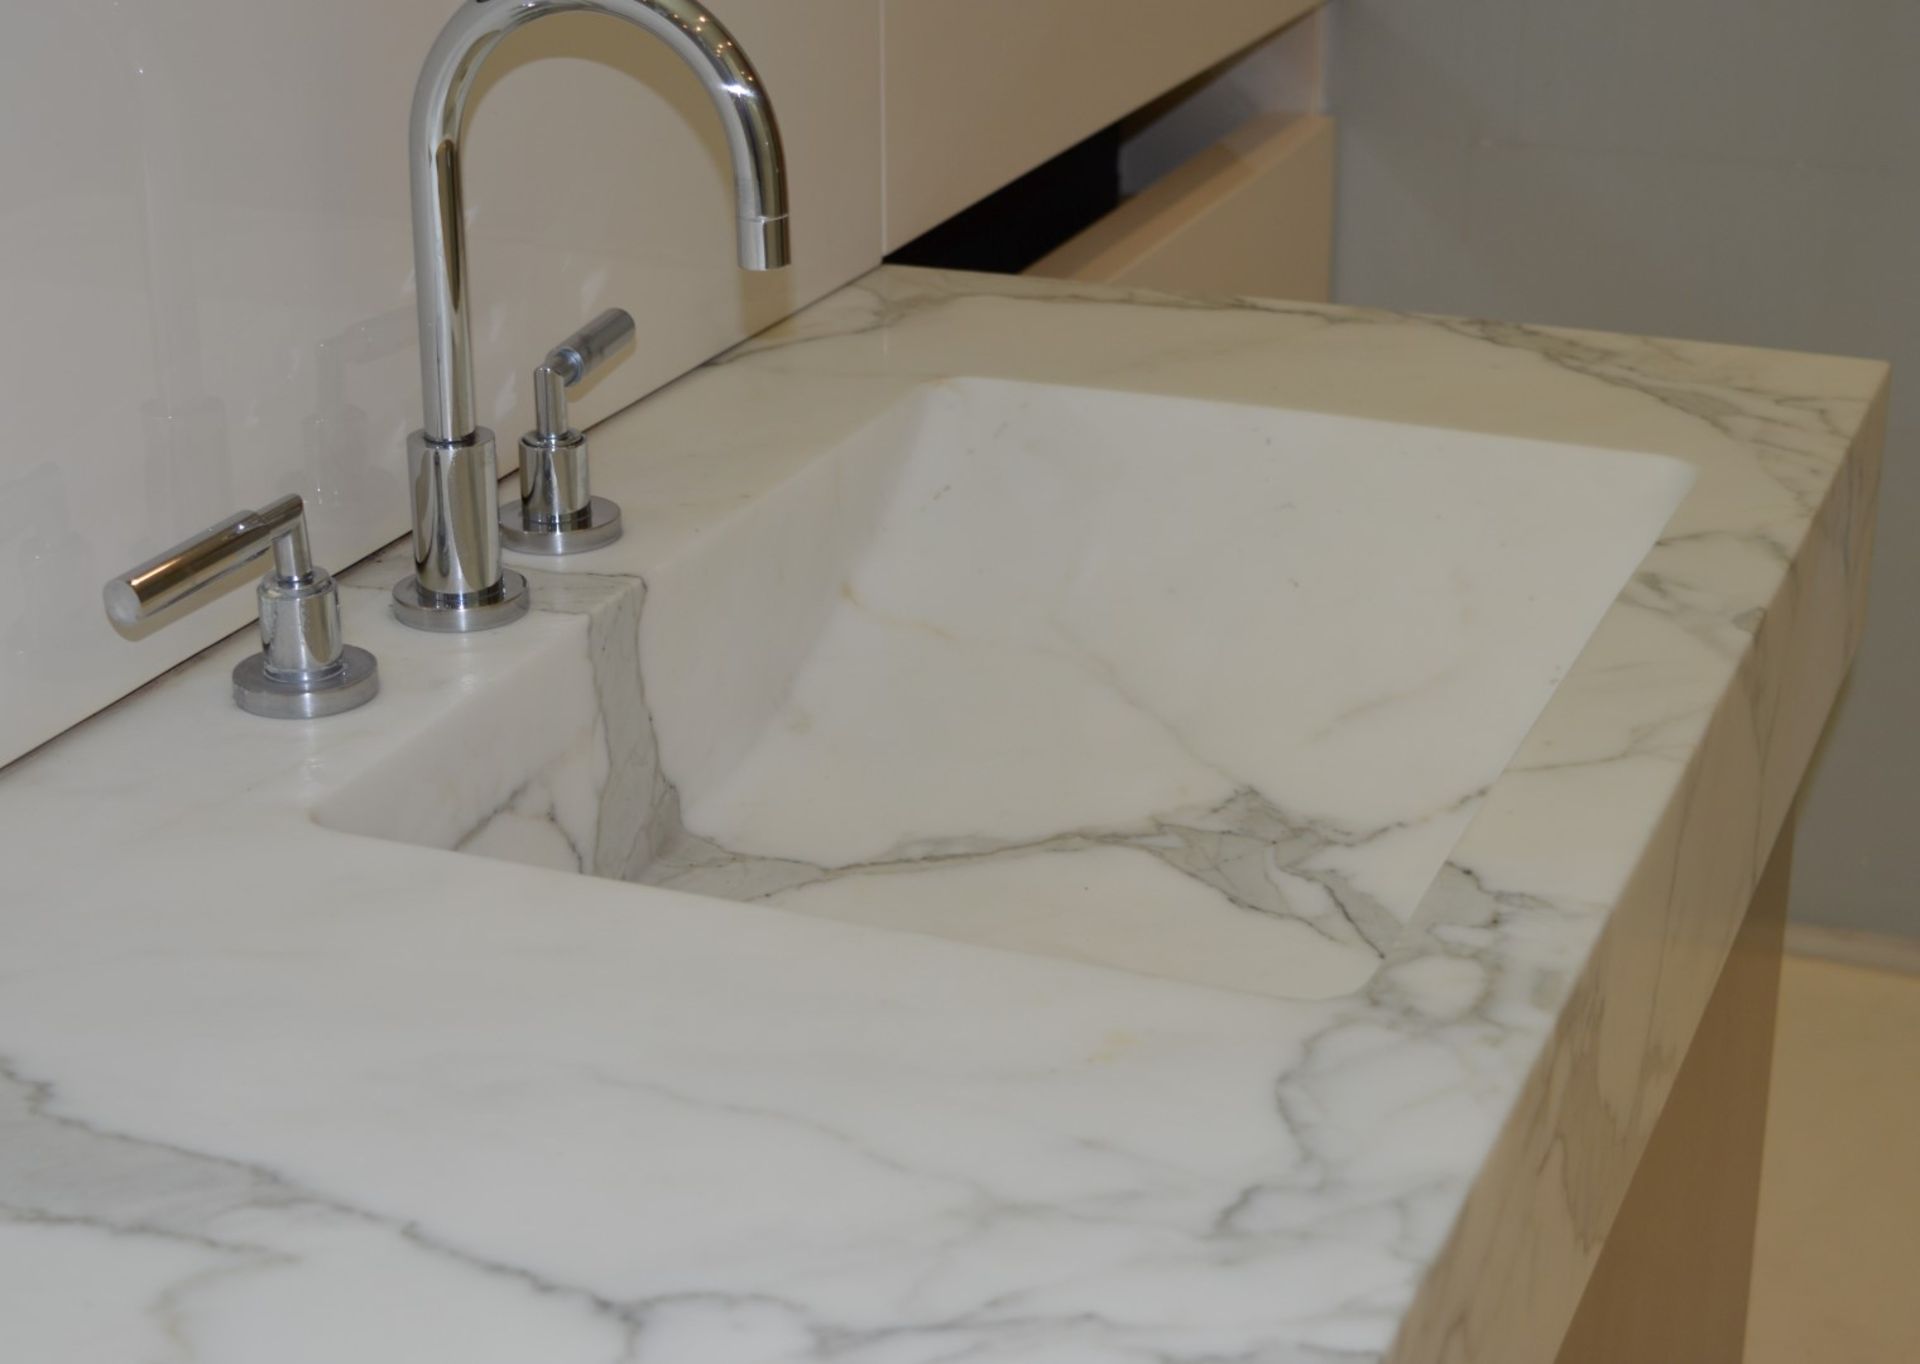 1 x Bespoke His & Hers Marble Bathroom Vanity Unit - Exquisite 7ft Twin Marble Sink Basin With Two - Image 11 of 25